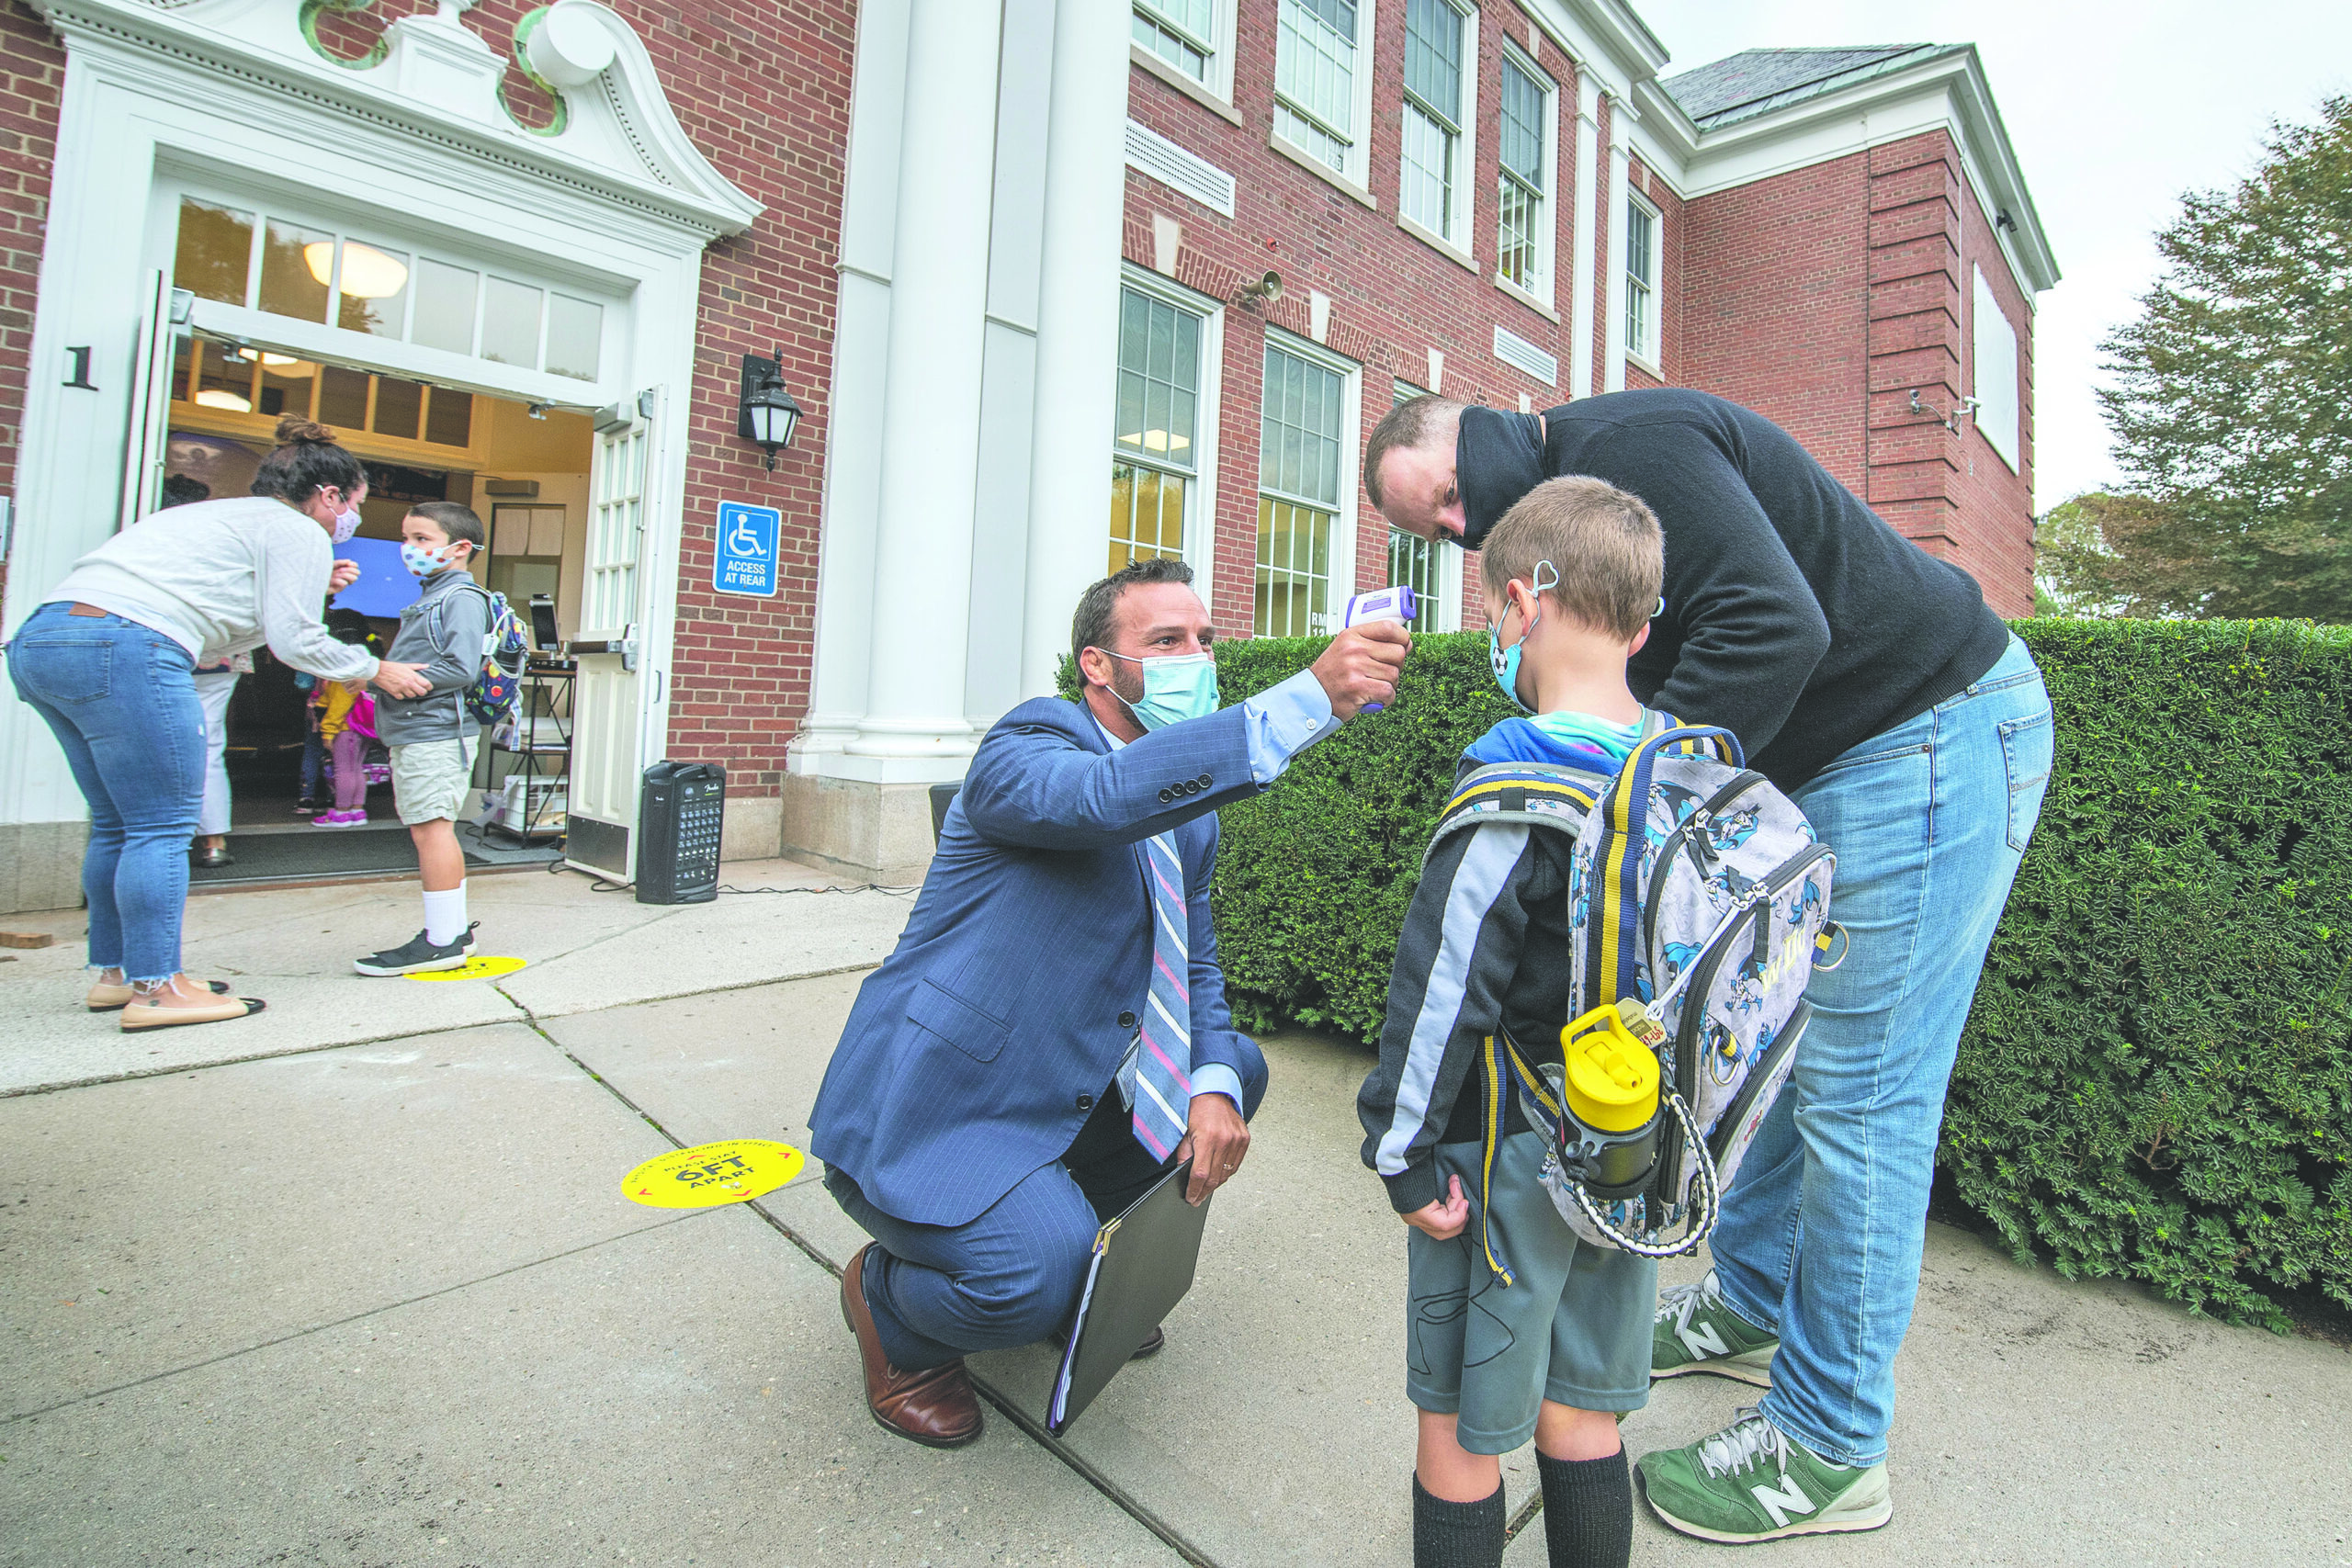 Bridgehampton School  Assistant Principal Michael Cox check's a little one's temperature before he goes inside the building on the first day of school at the Bridgehampton School on September 14, 2020.  MICHAEL HELLER